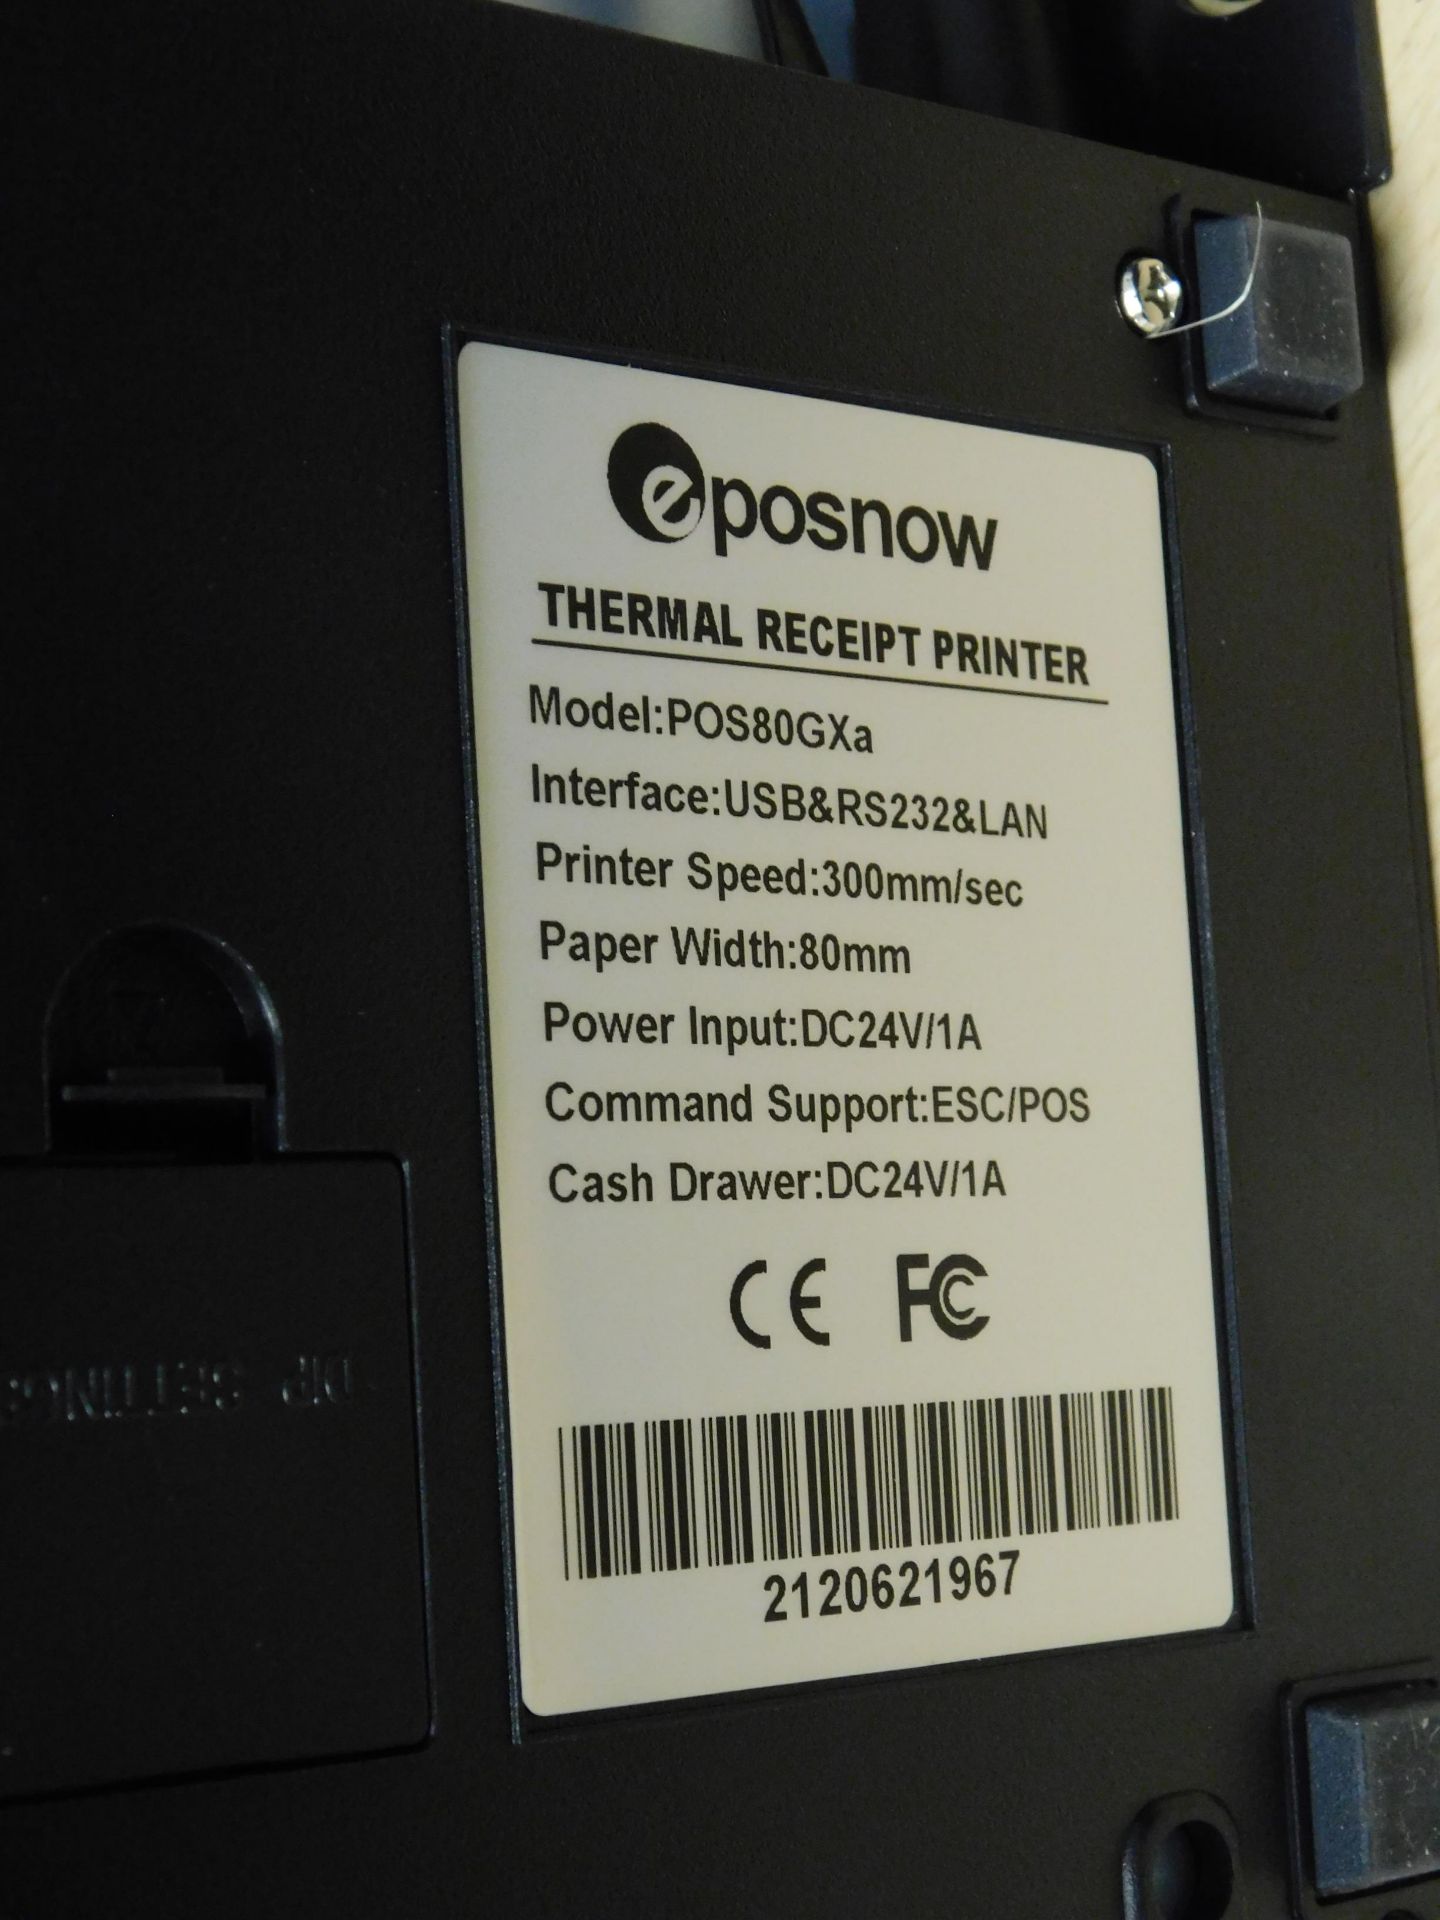 Eposnow DC24V/1A Cash Drawer & Monitor with POS80GXa Receipt Printer (Location: Finchley. Please - Image 3 of 3